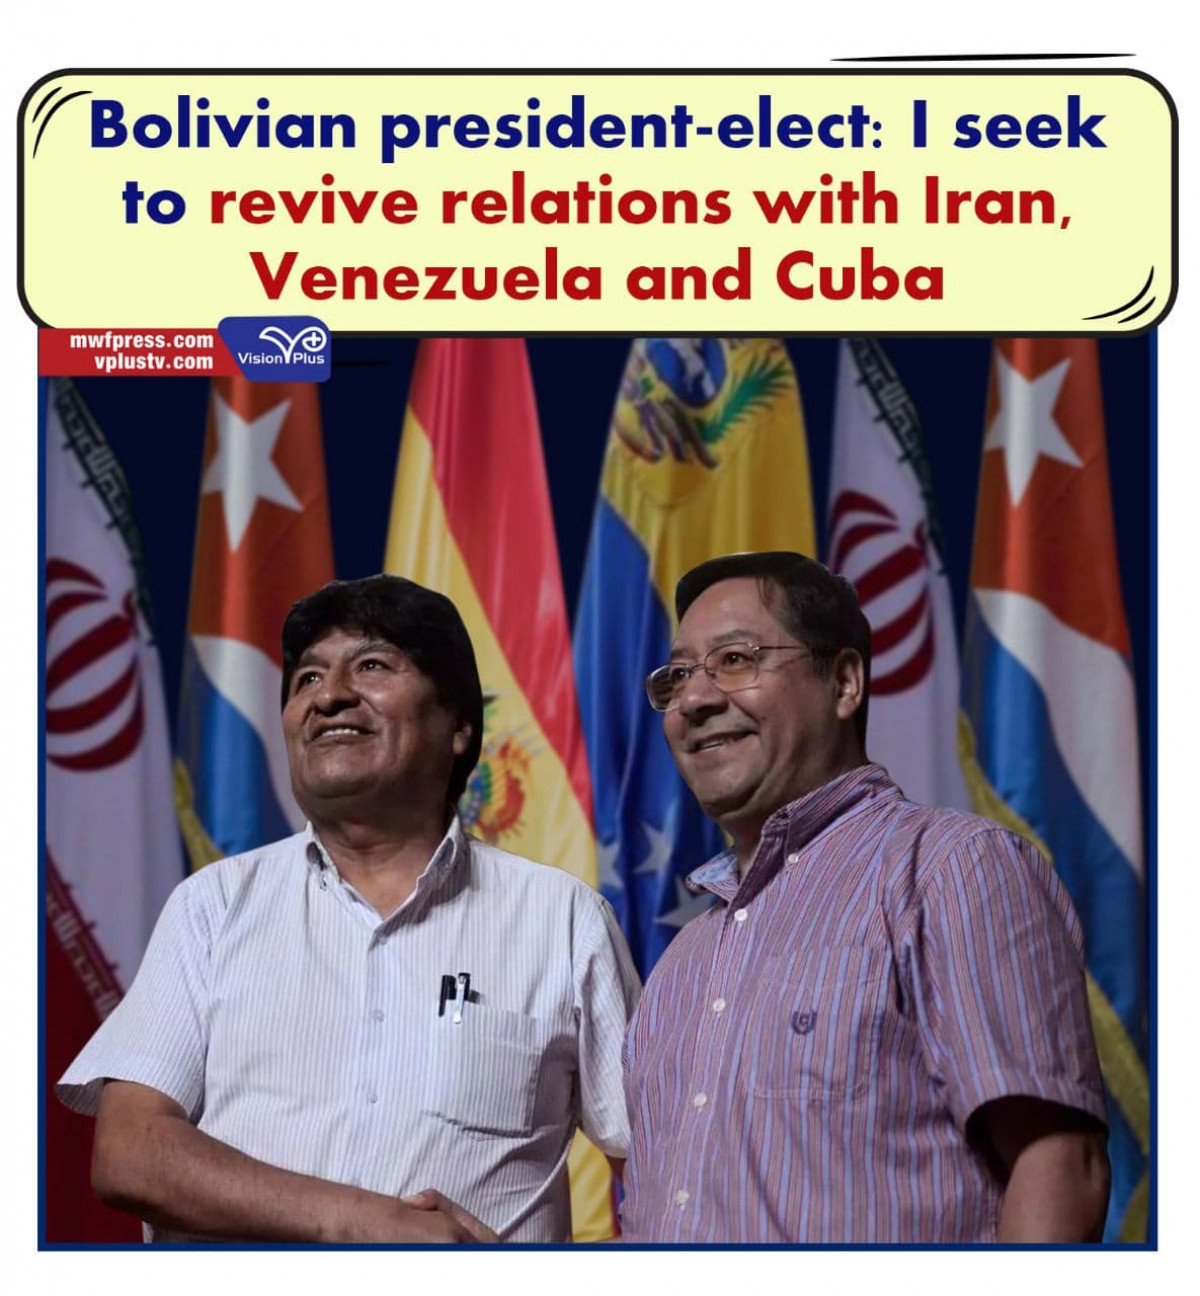 Bolivian president-elect: I seek to revive relations with Iran, Venezuela and Cuba